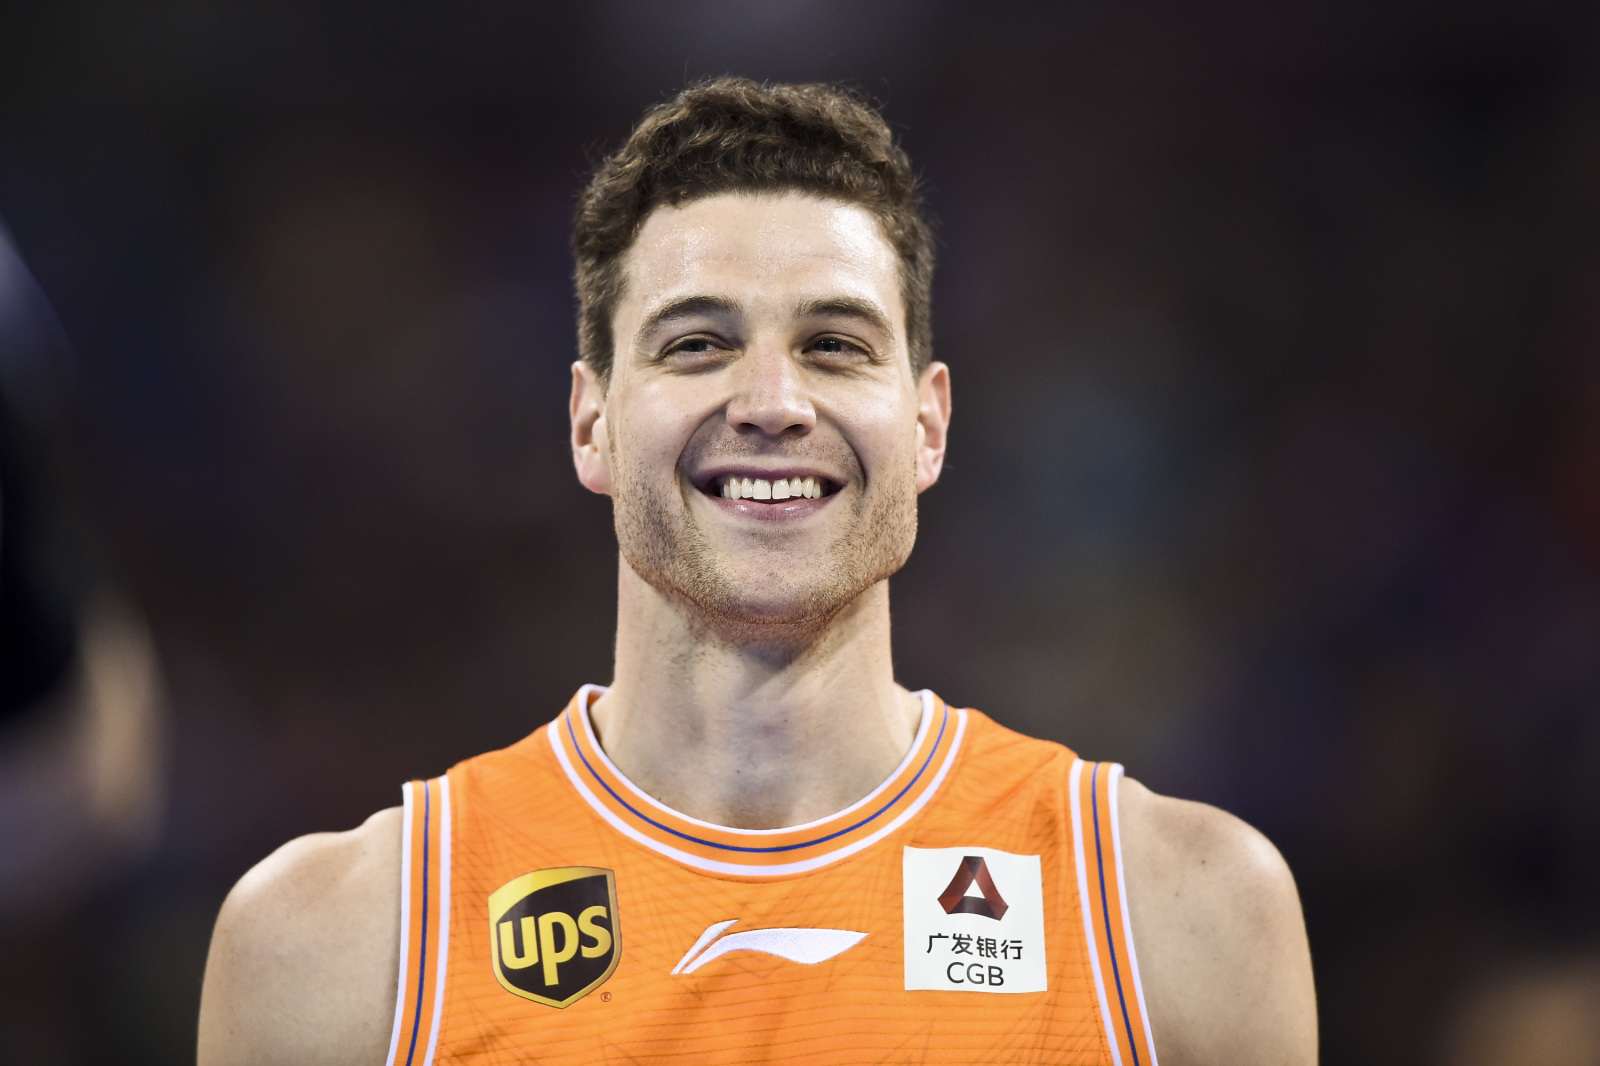 Jimmer Fredette 32 Shanghai Sharks China Basketball Jersey with